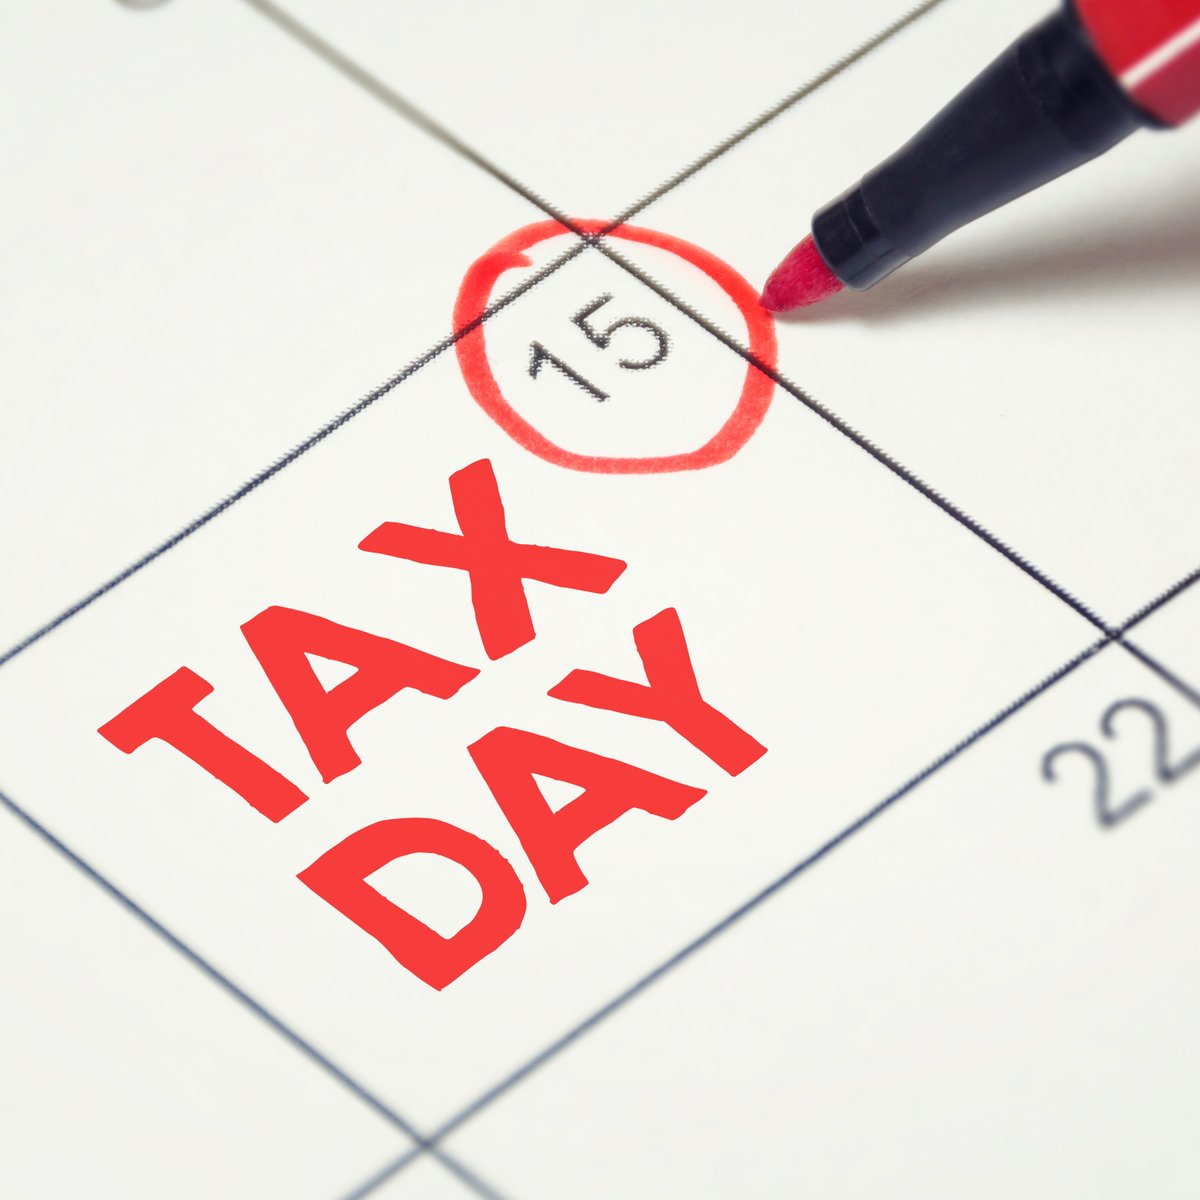 Taxpayers who have not yet filed their state income tax returns are urged to take advantage of the last weekend before the Monday, April 15, deadline to ensure accuracy. michigan.gov/treasury/news/… #MIGov